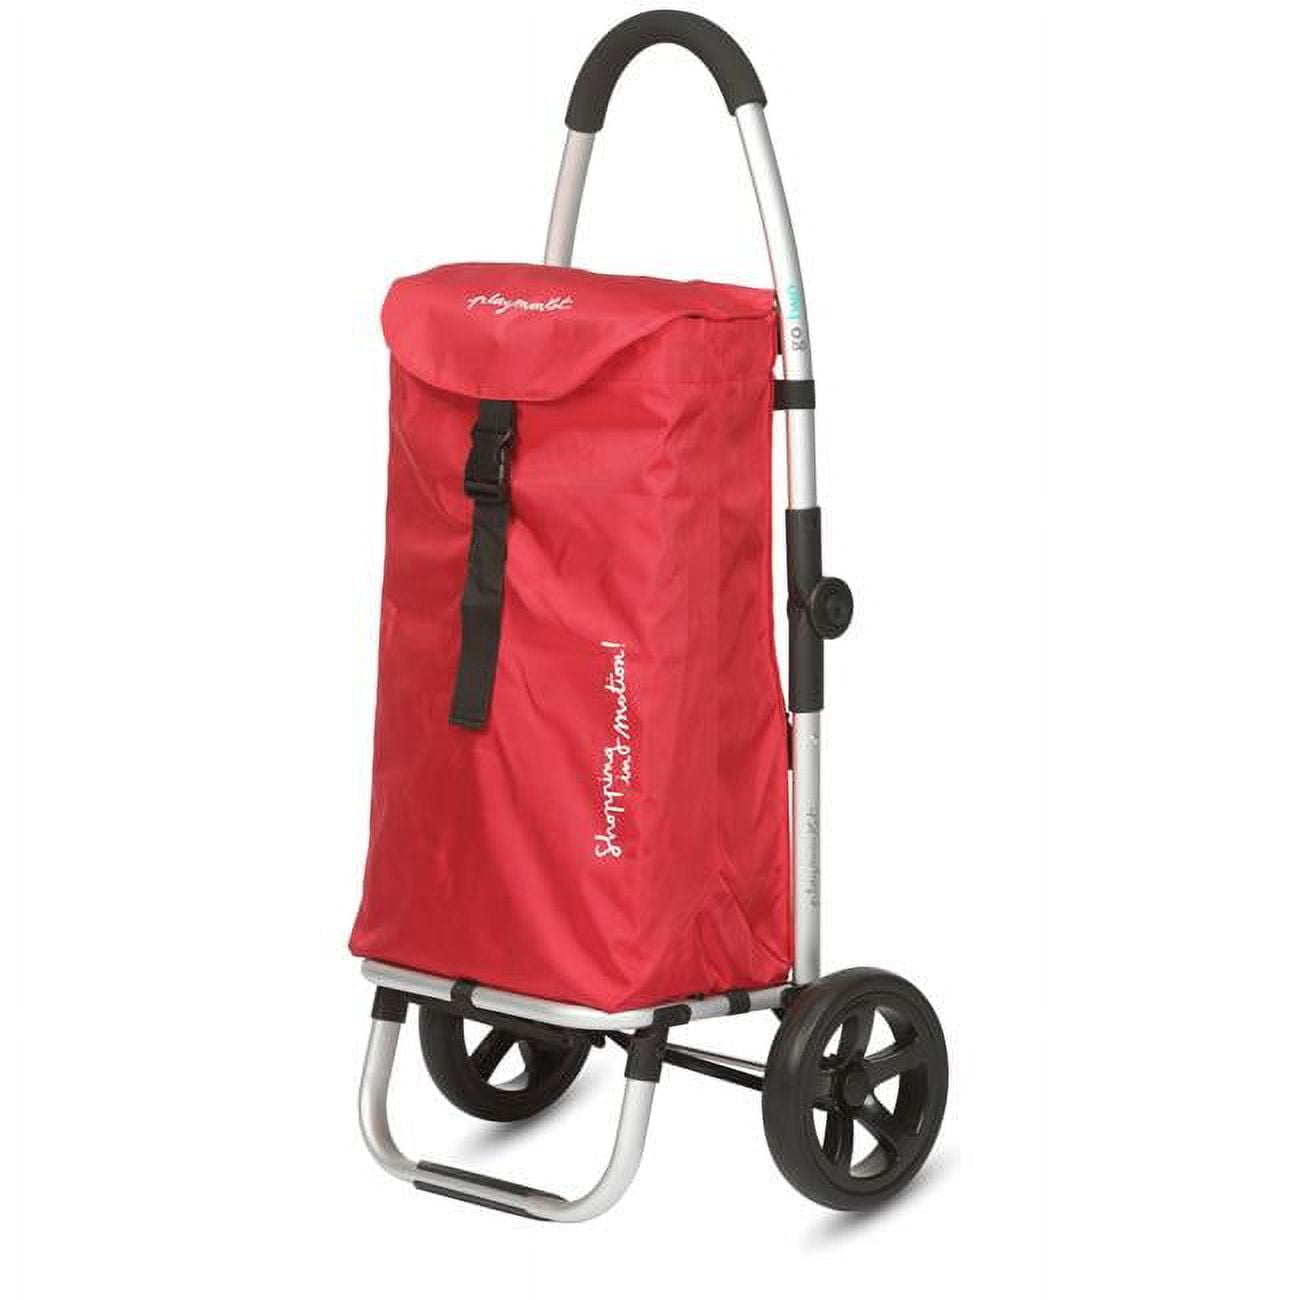 24916DCH-277 Go Two Compact Utility Cart, Cherry -  Playmarket